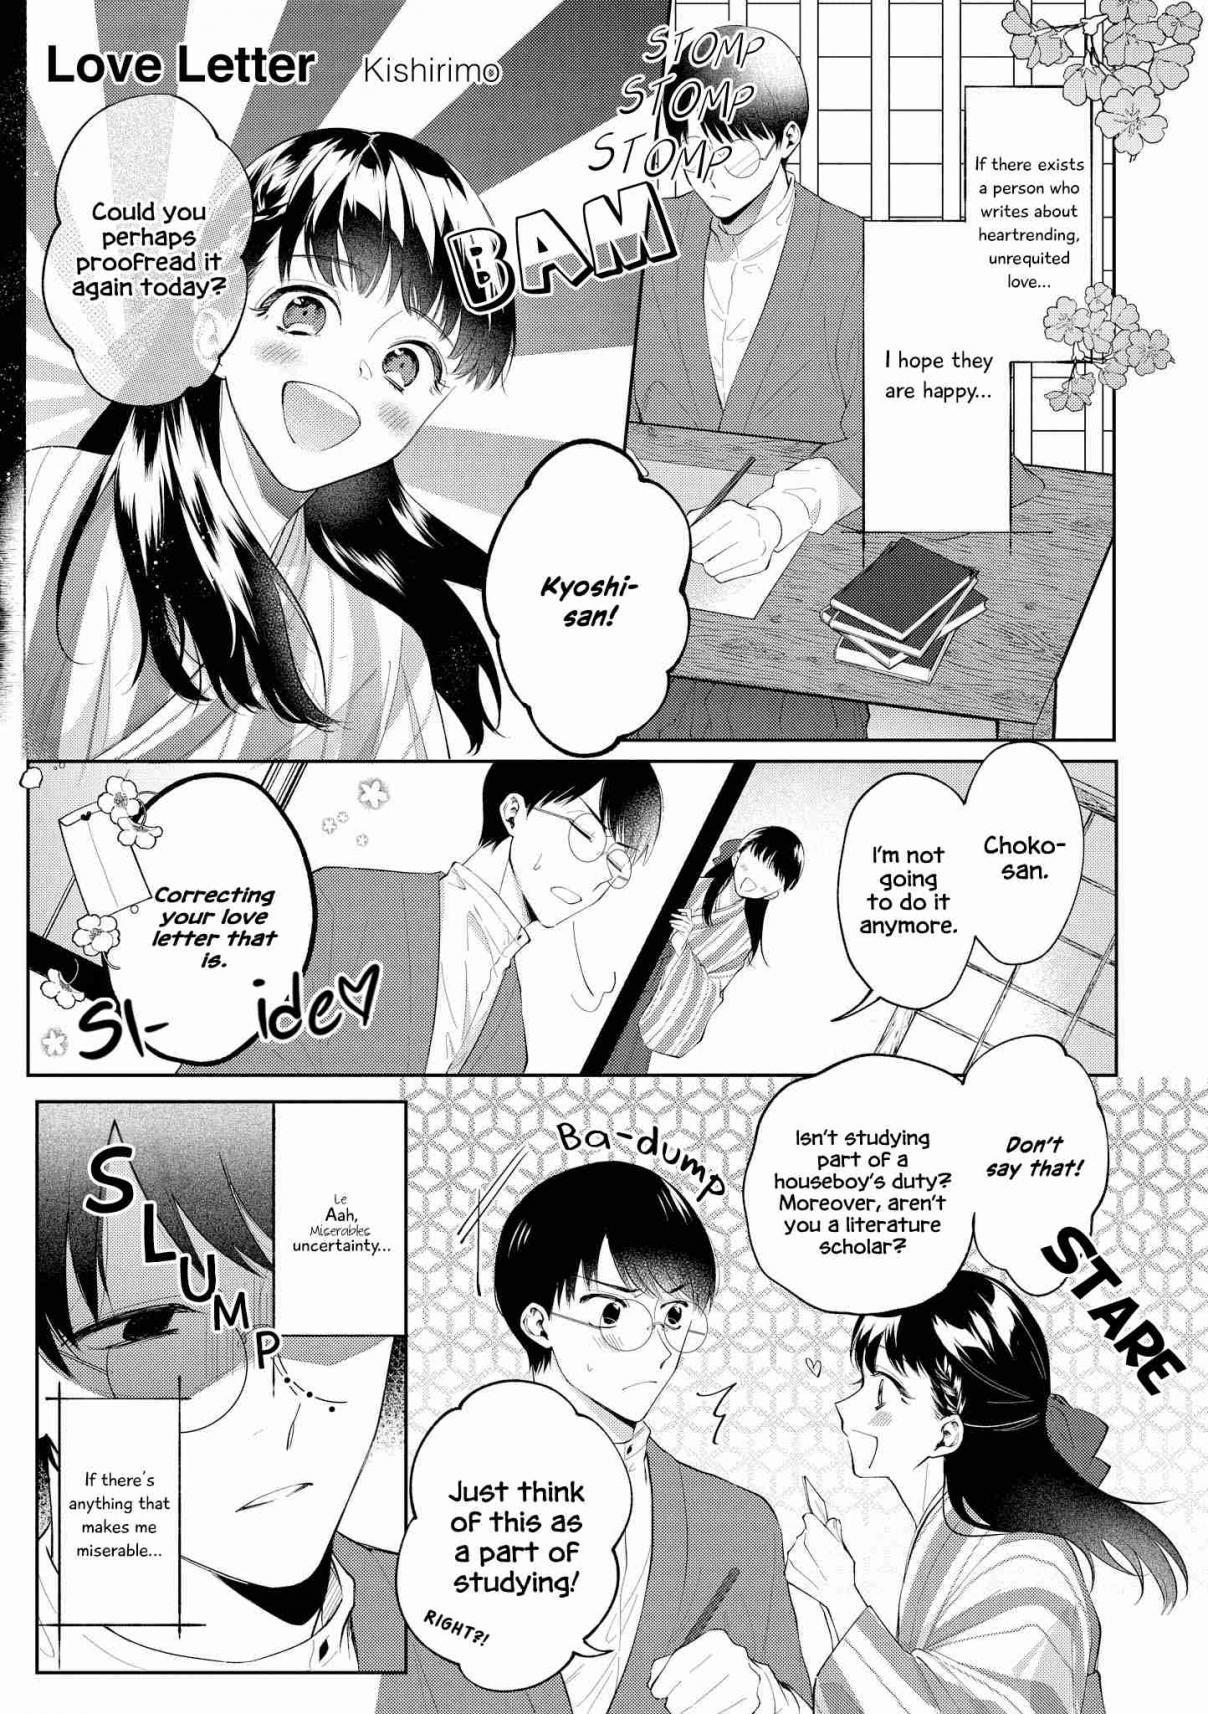 “It’s Too Precious and Hard to Read!!” 4P Short Stories Vol. 1 Ch. 10 Love Letter [by Kishirimo]